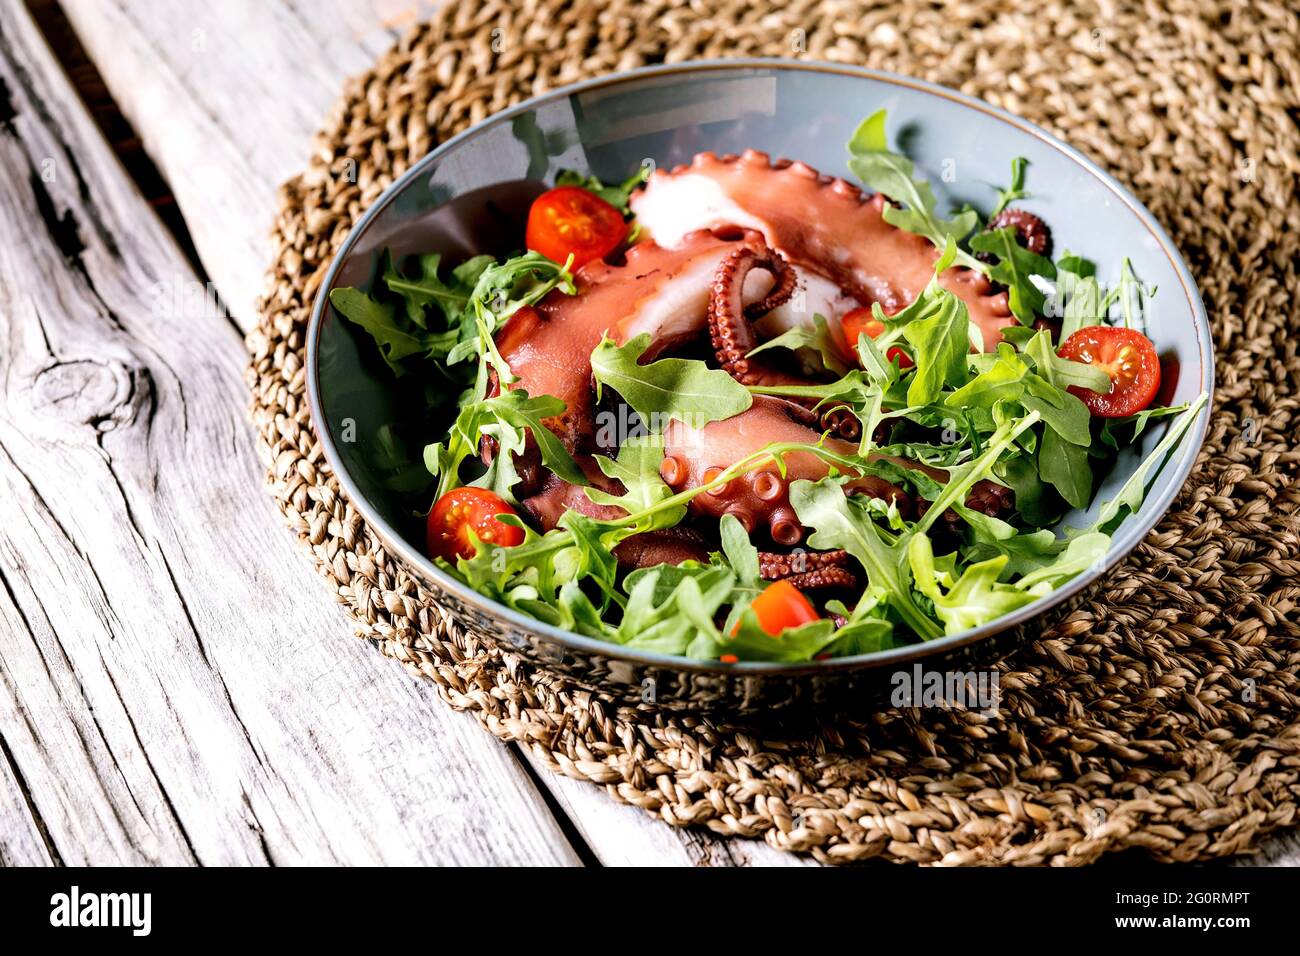 Seafood salad. Coocked tentacles of octopus on blue ceramic plate served with rocket leaf aragula and cherry tomato salad over grey wooden background Stock Photo